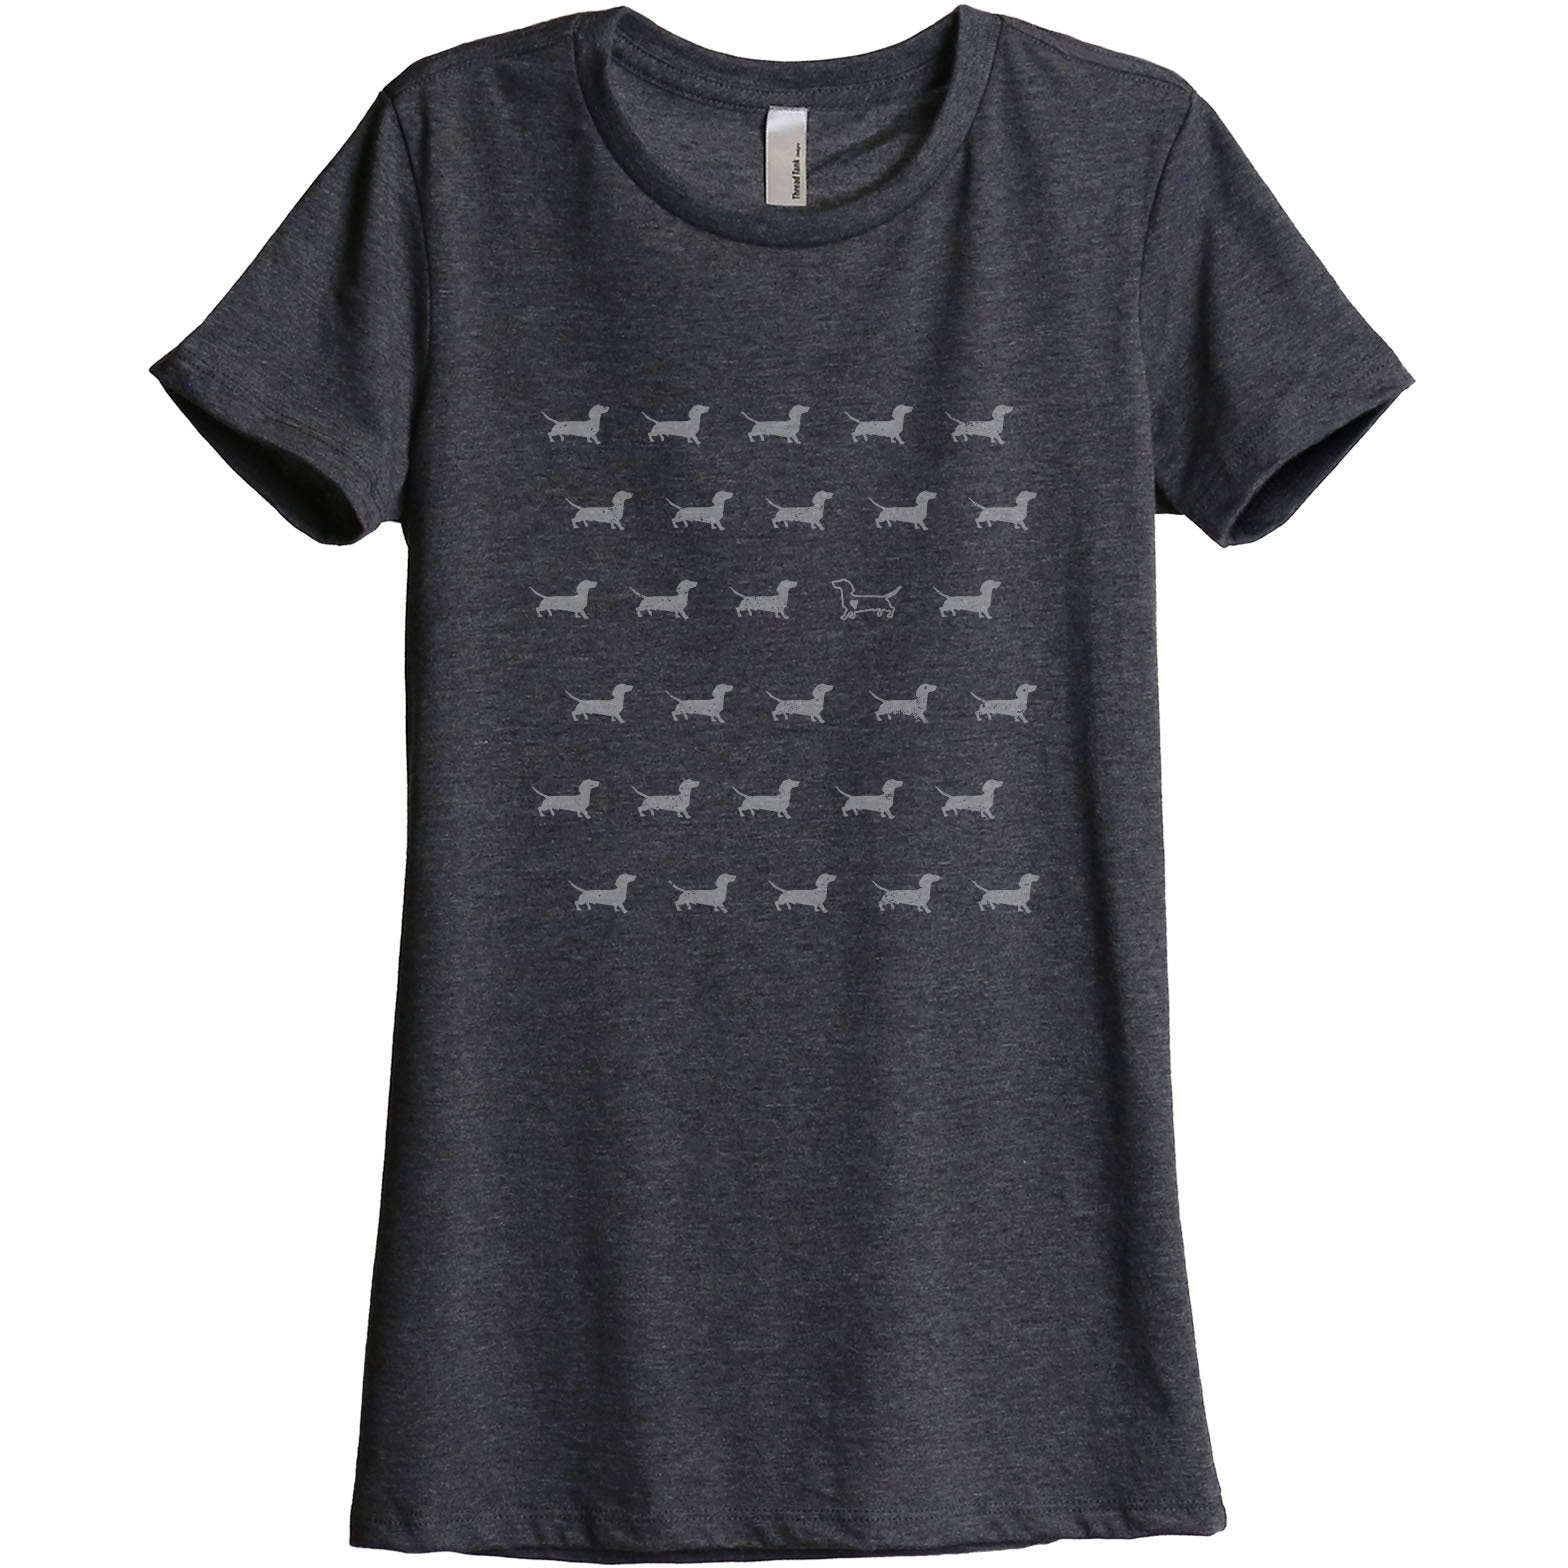 Dachshund Stand Out Women's Relaxed Crewneck T-Shirt Top Tee Charcoal Grey
